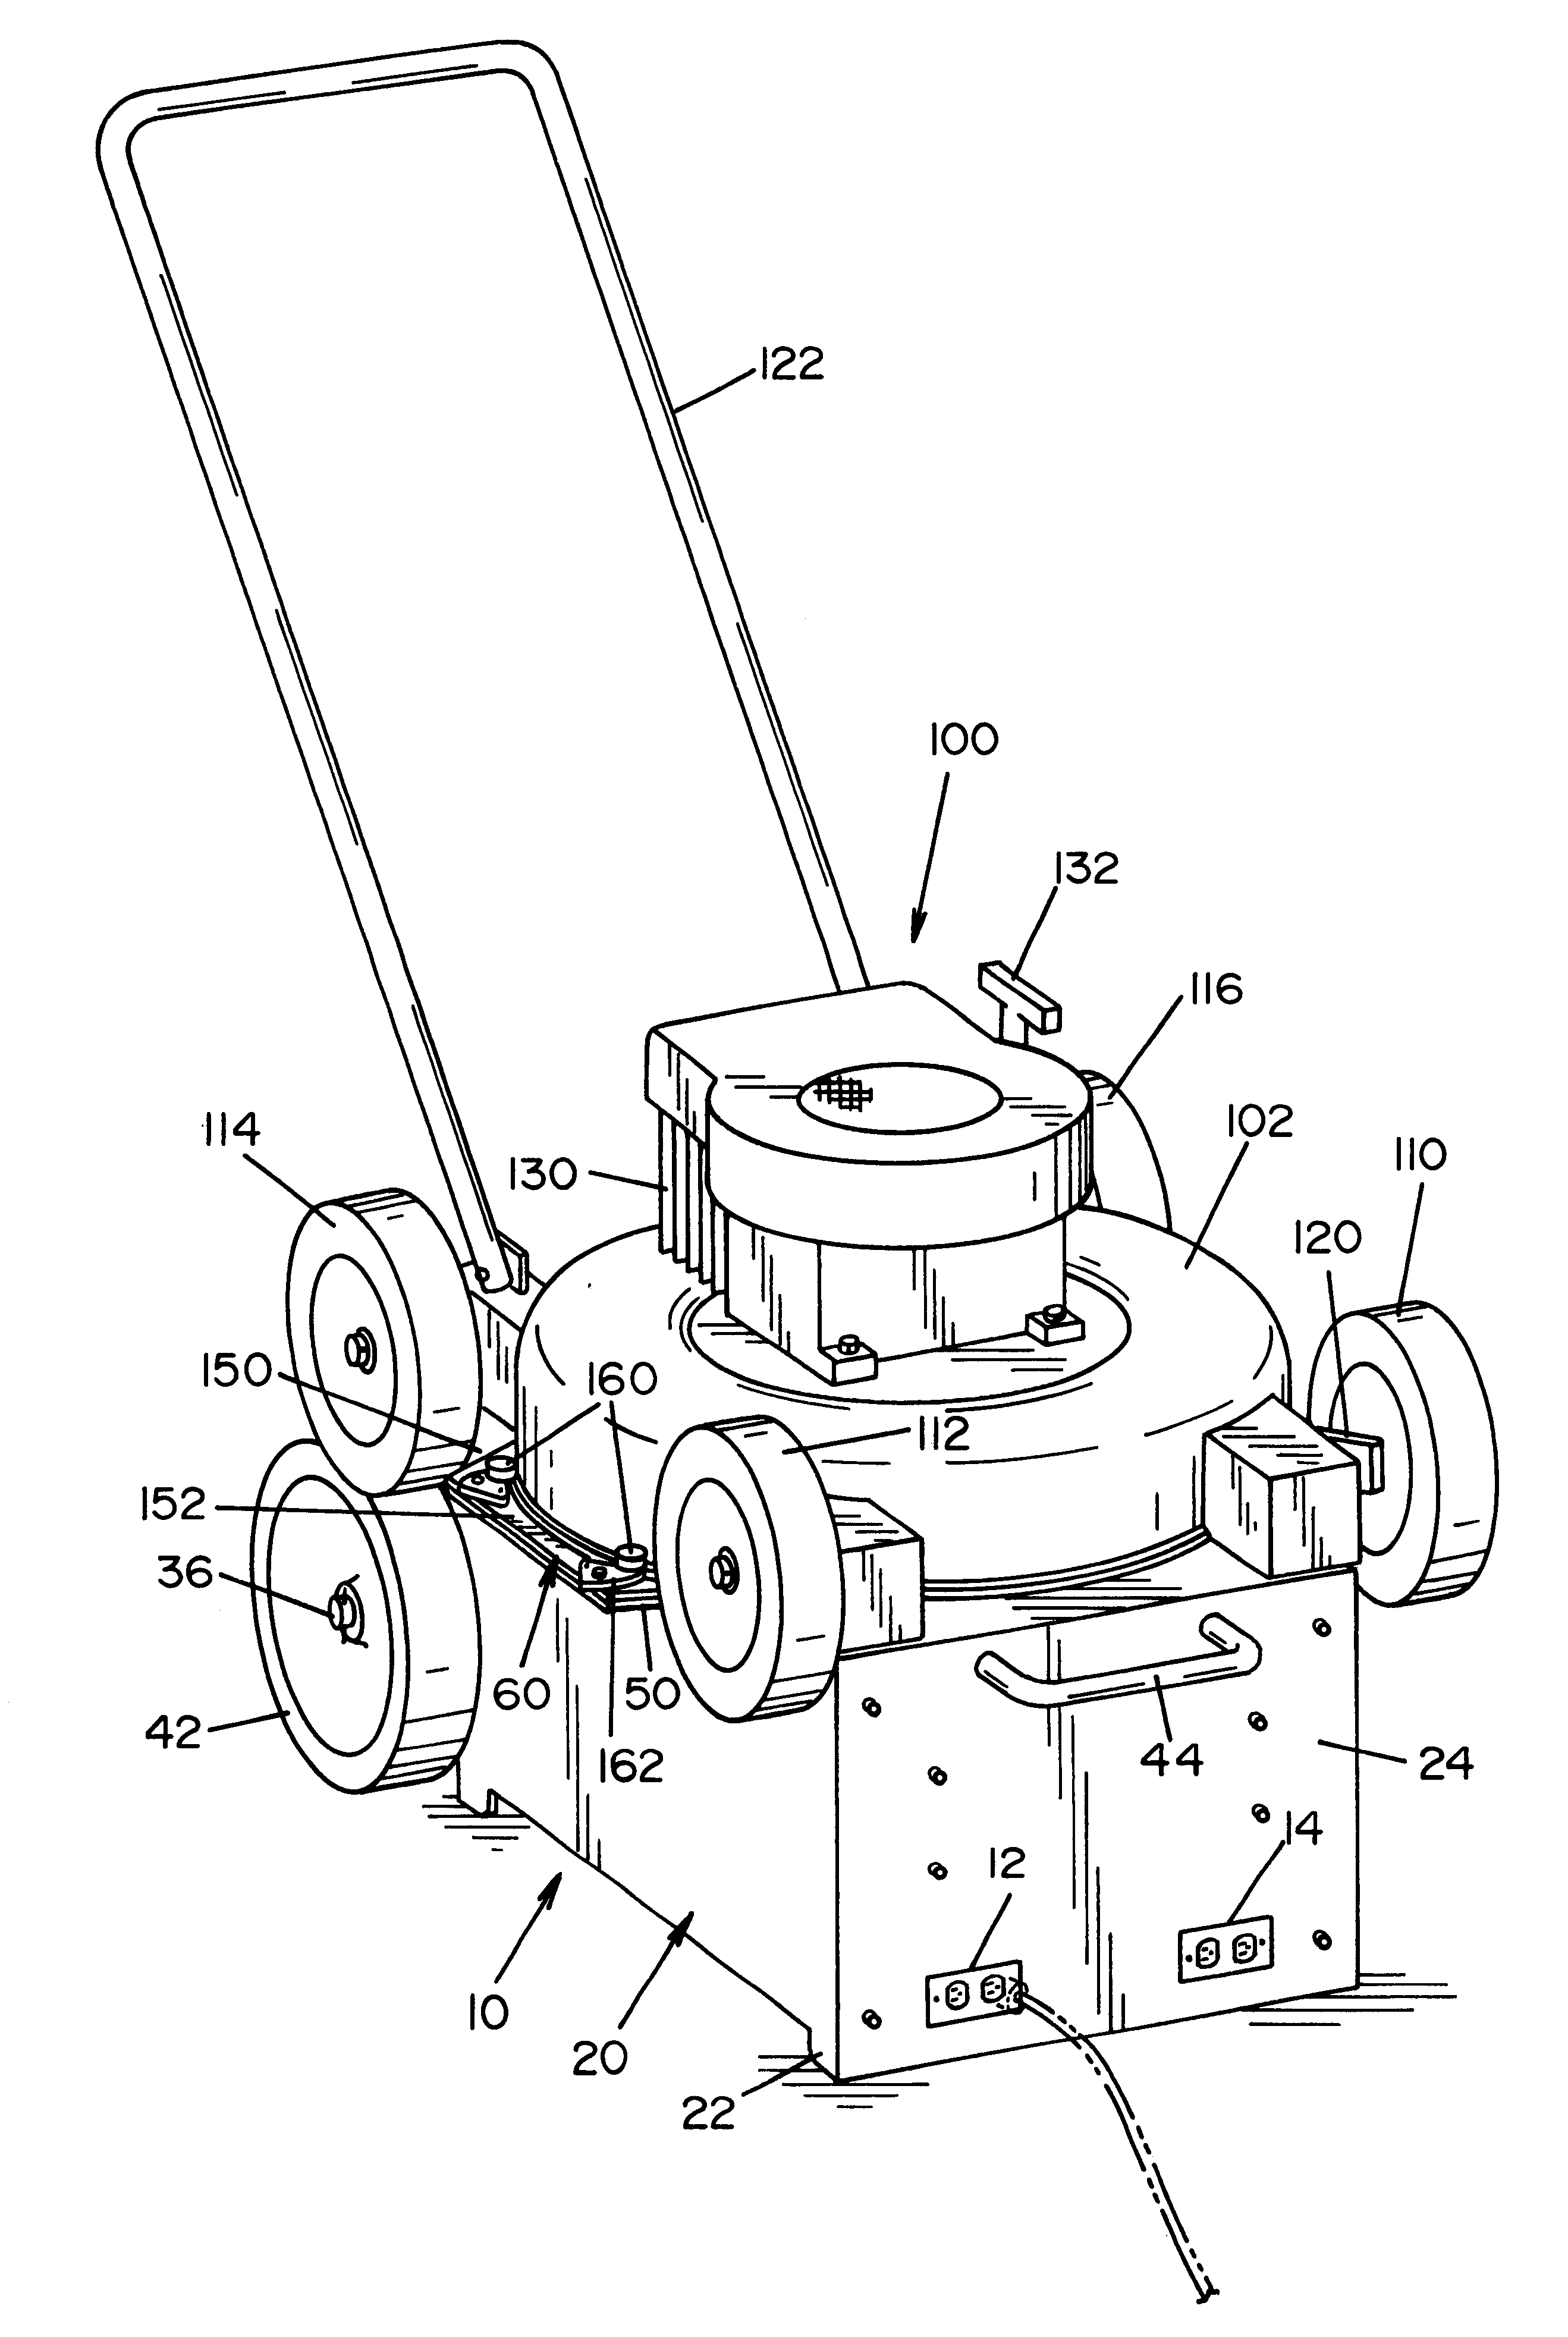 Electric generating domestic implement